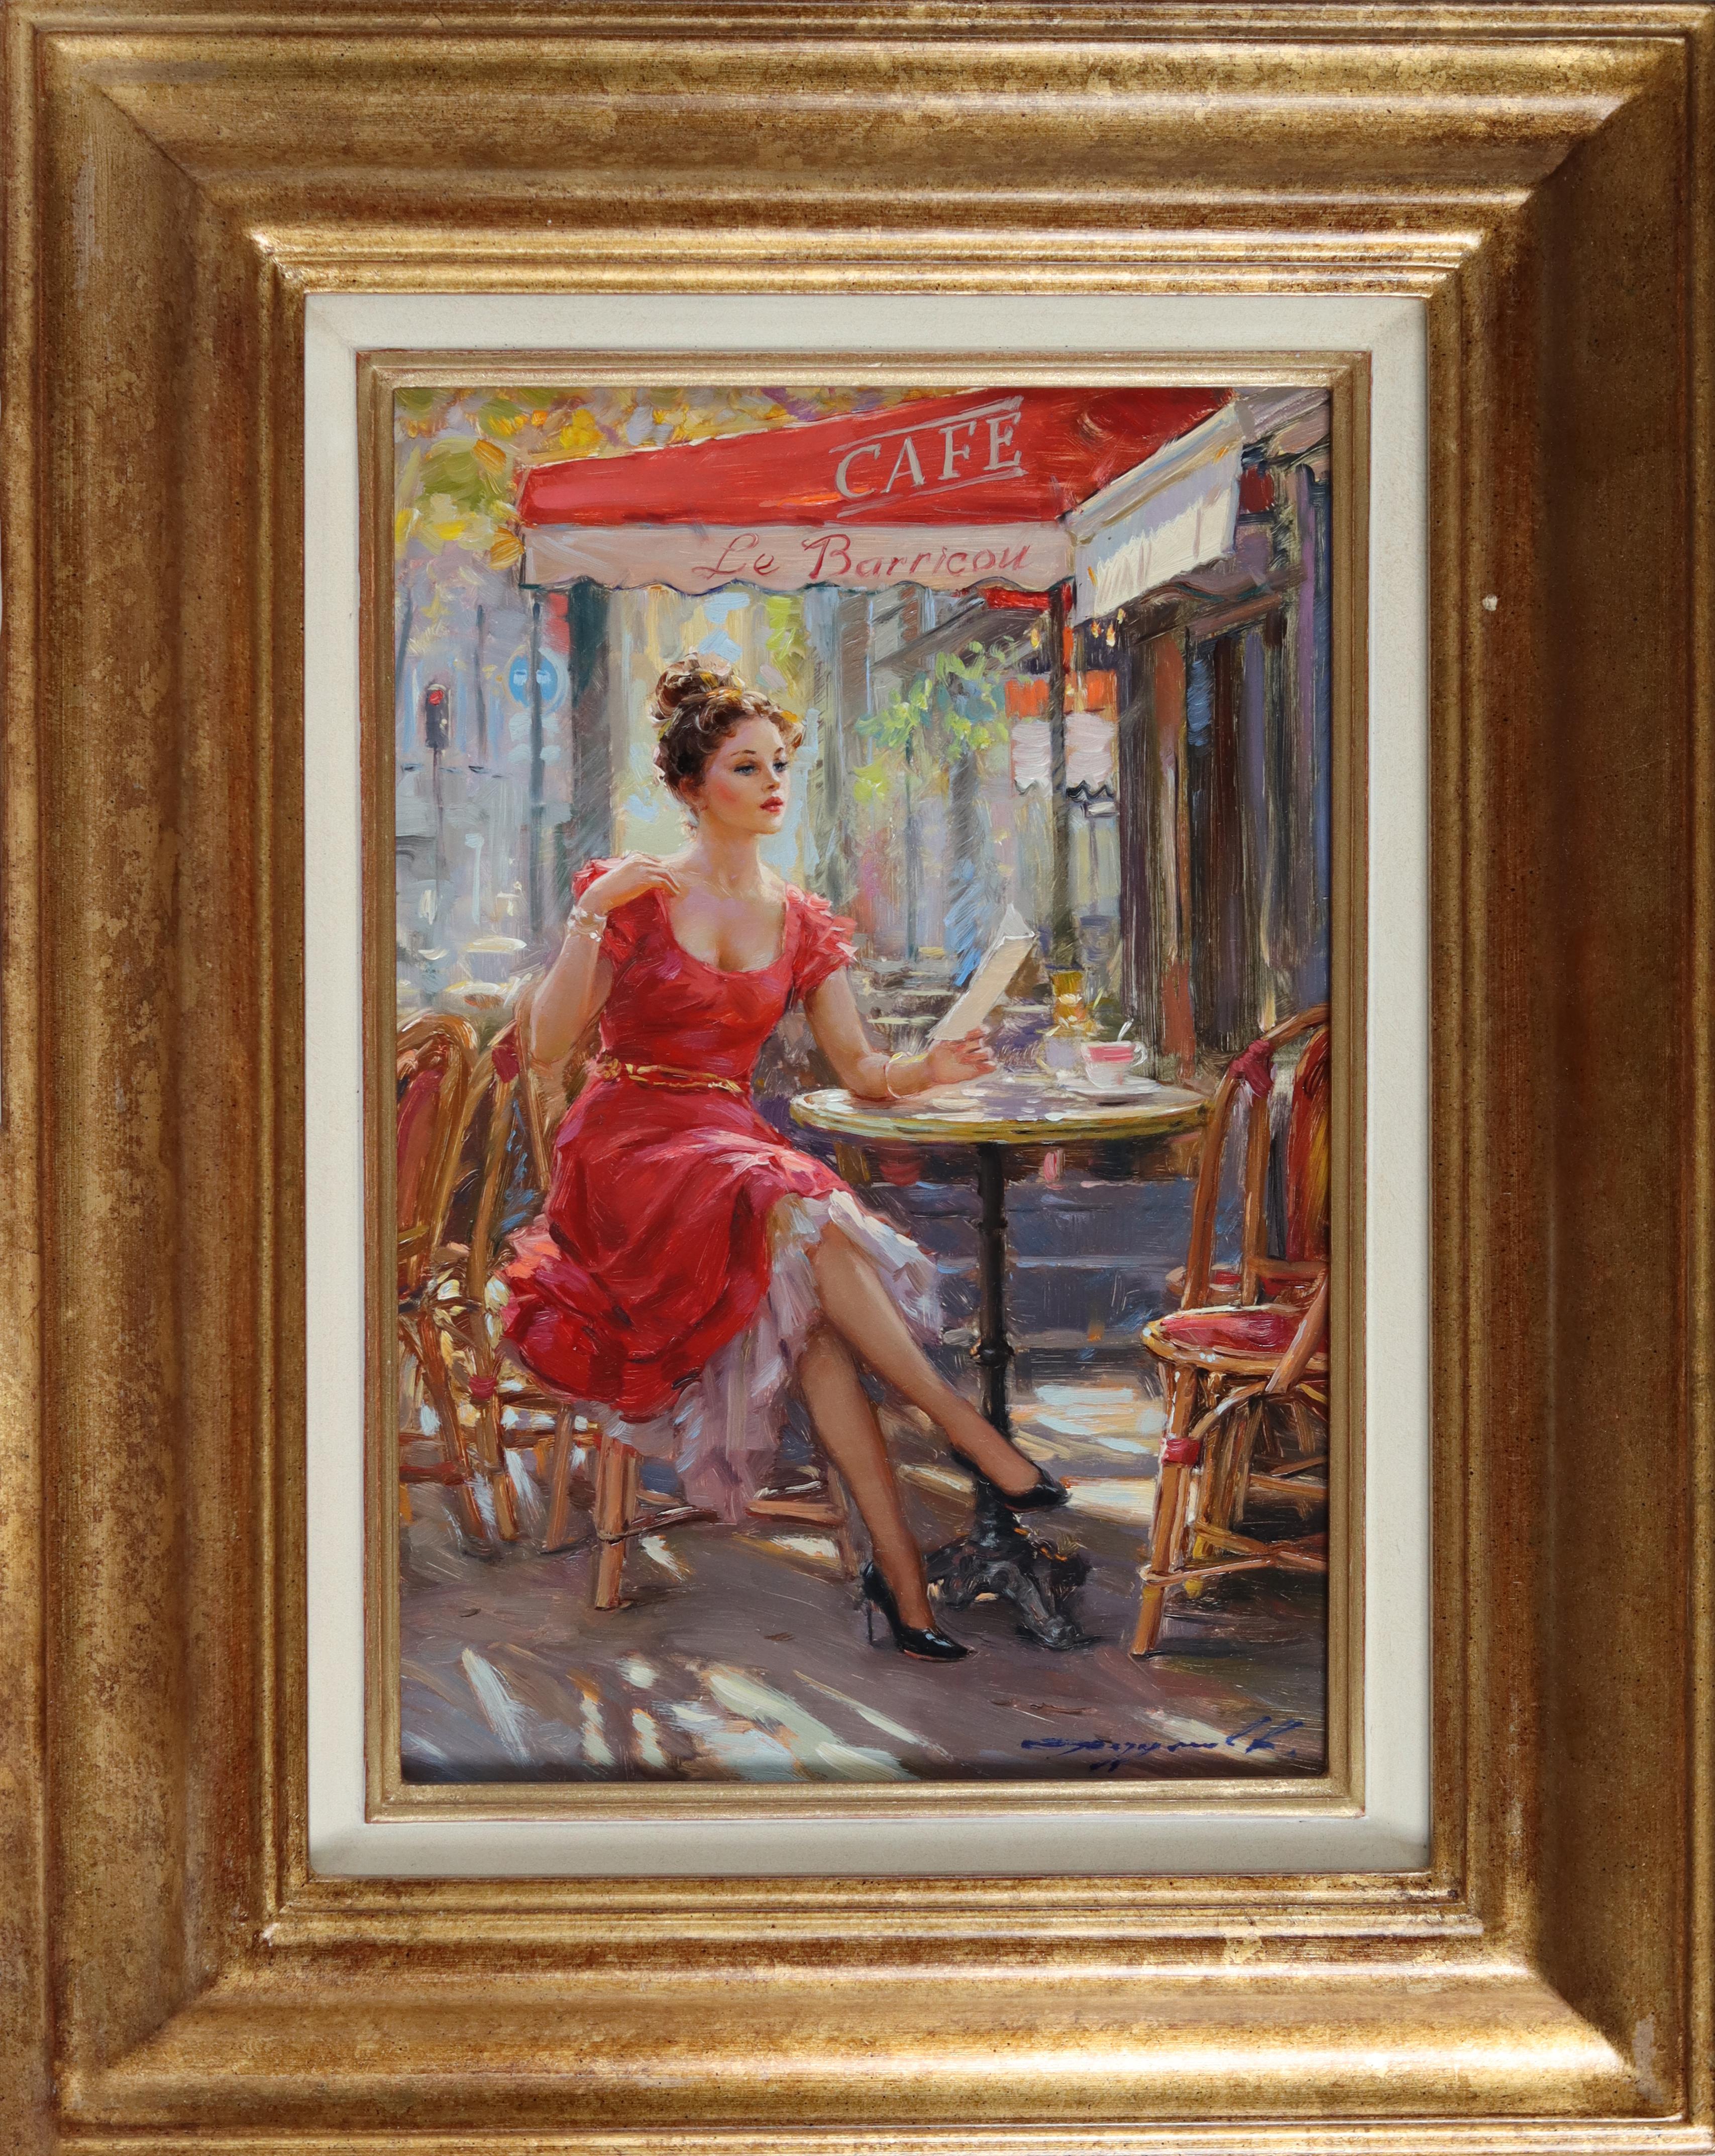 Elegant Lady in a Red Dress, Seated at a Parisian Café - Painting by Konstantin Razumov 